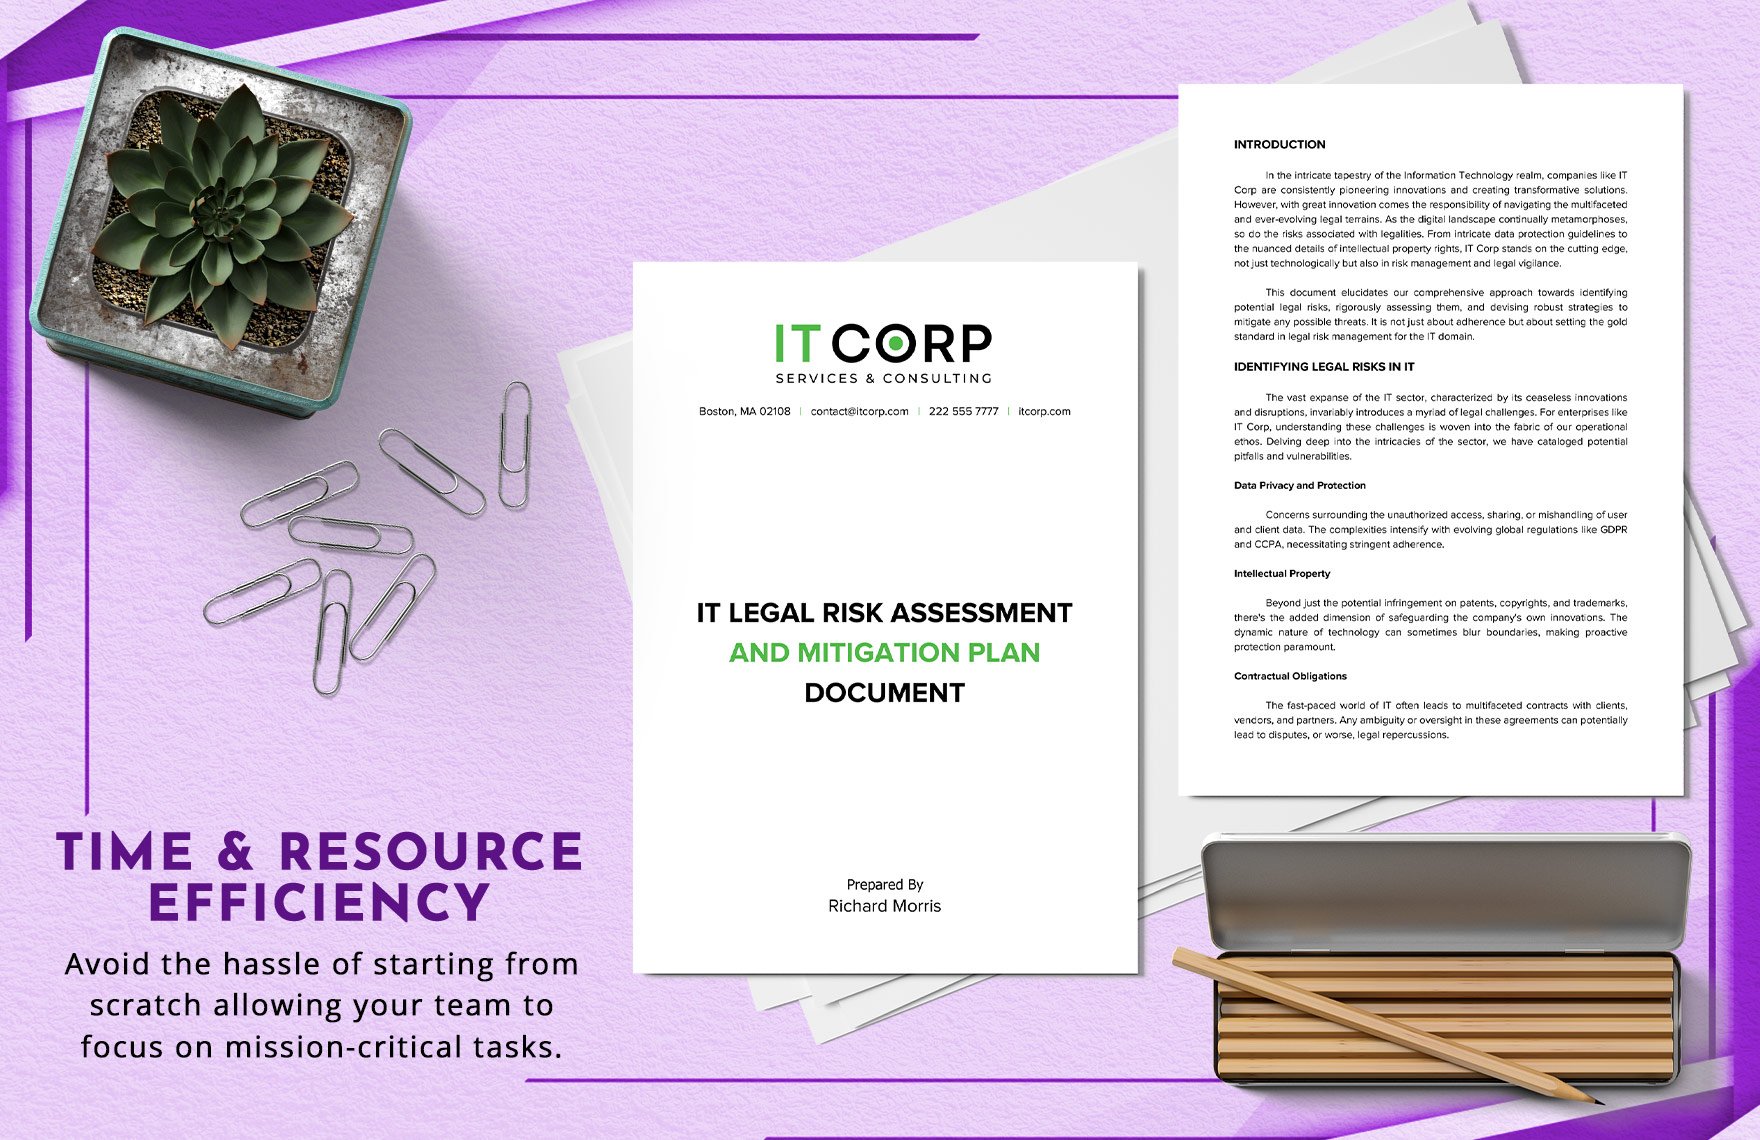 IT Legal Risk Assessment and Mitigation Plan Document Template